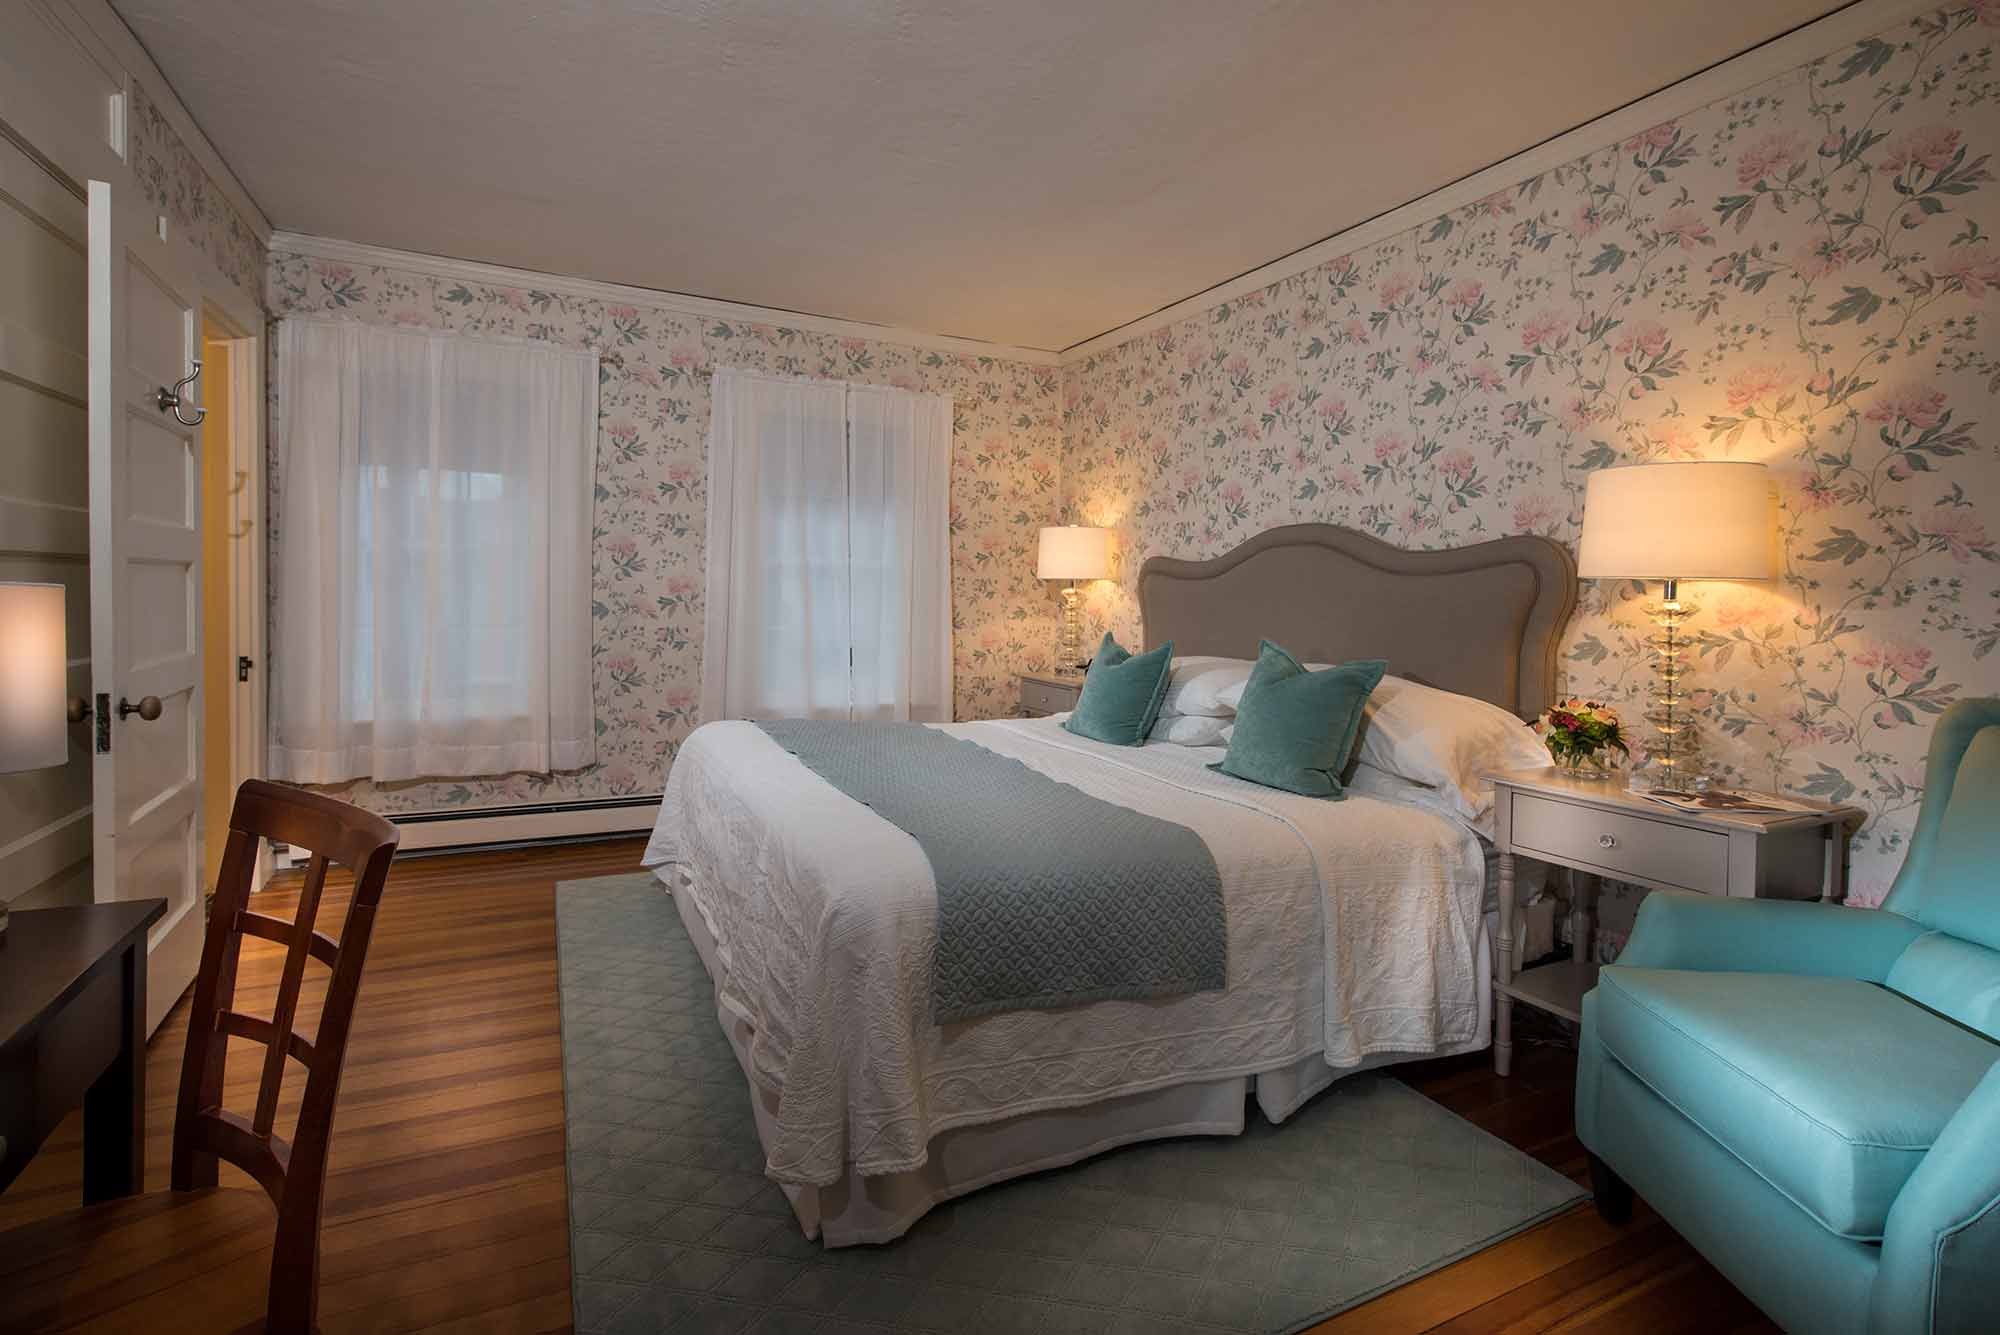 room 306 king bed in floral wall paper bedroom